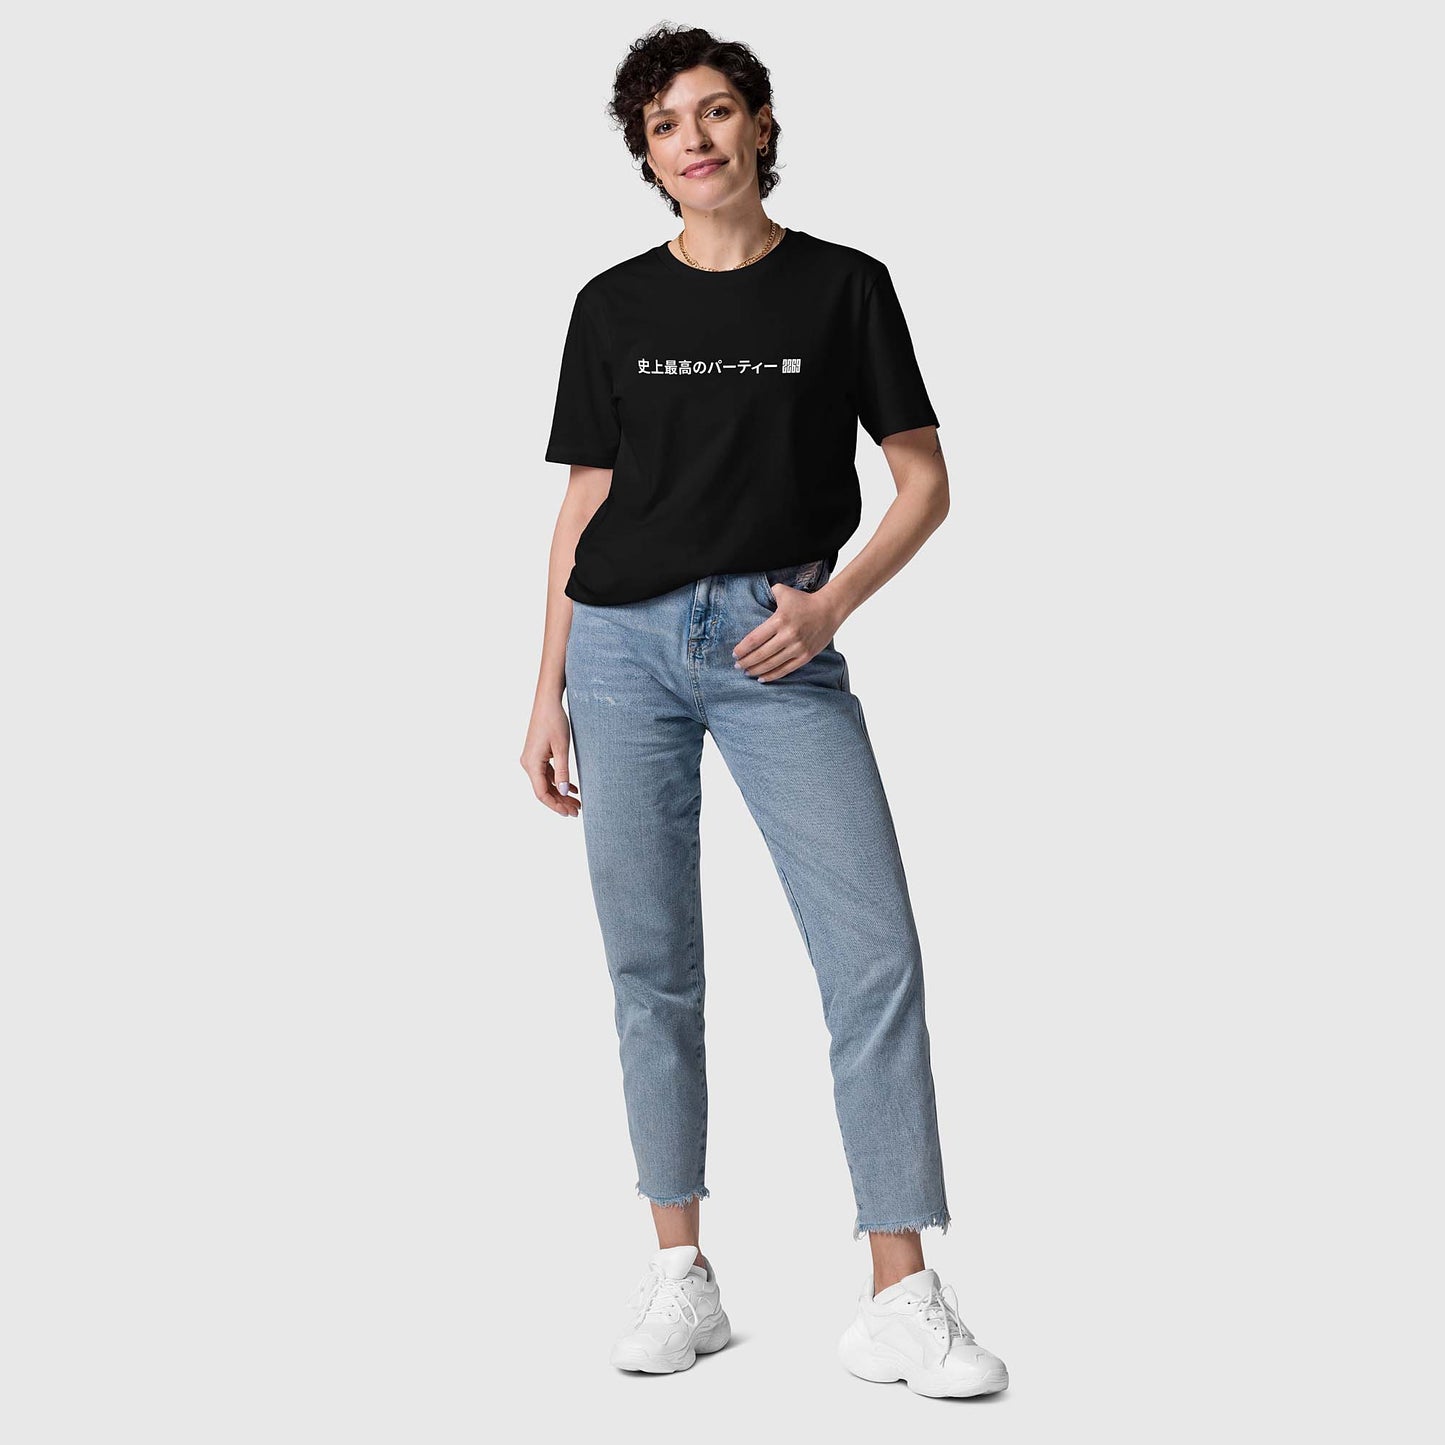 Unisex black organic cotton t-shirt with Japanese 2269 party message